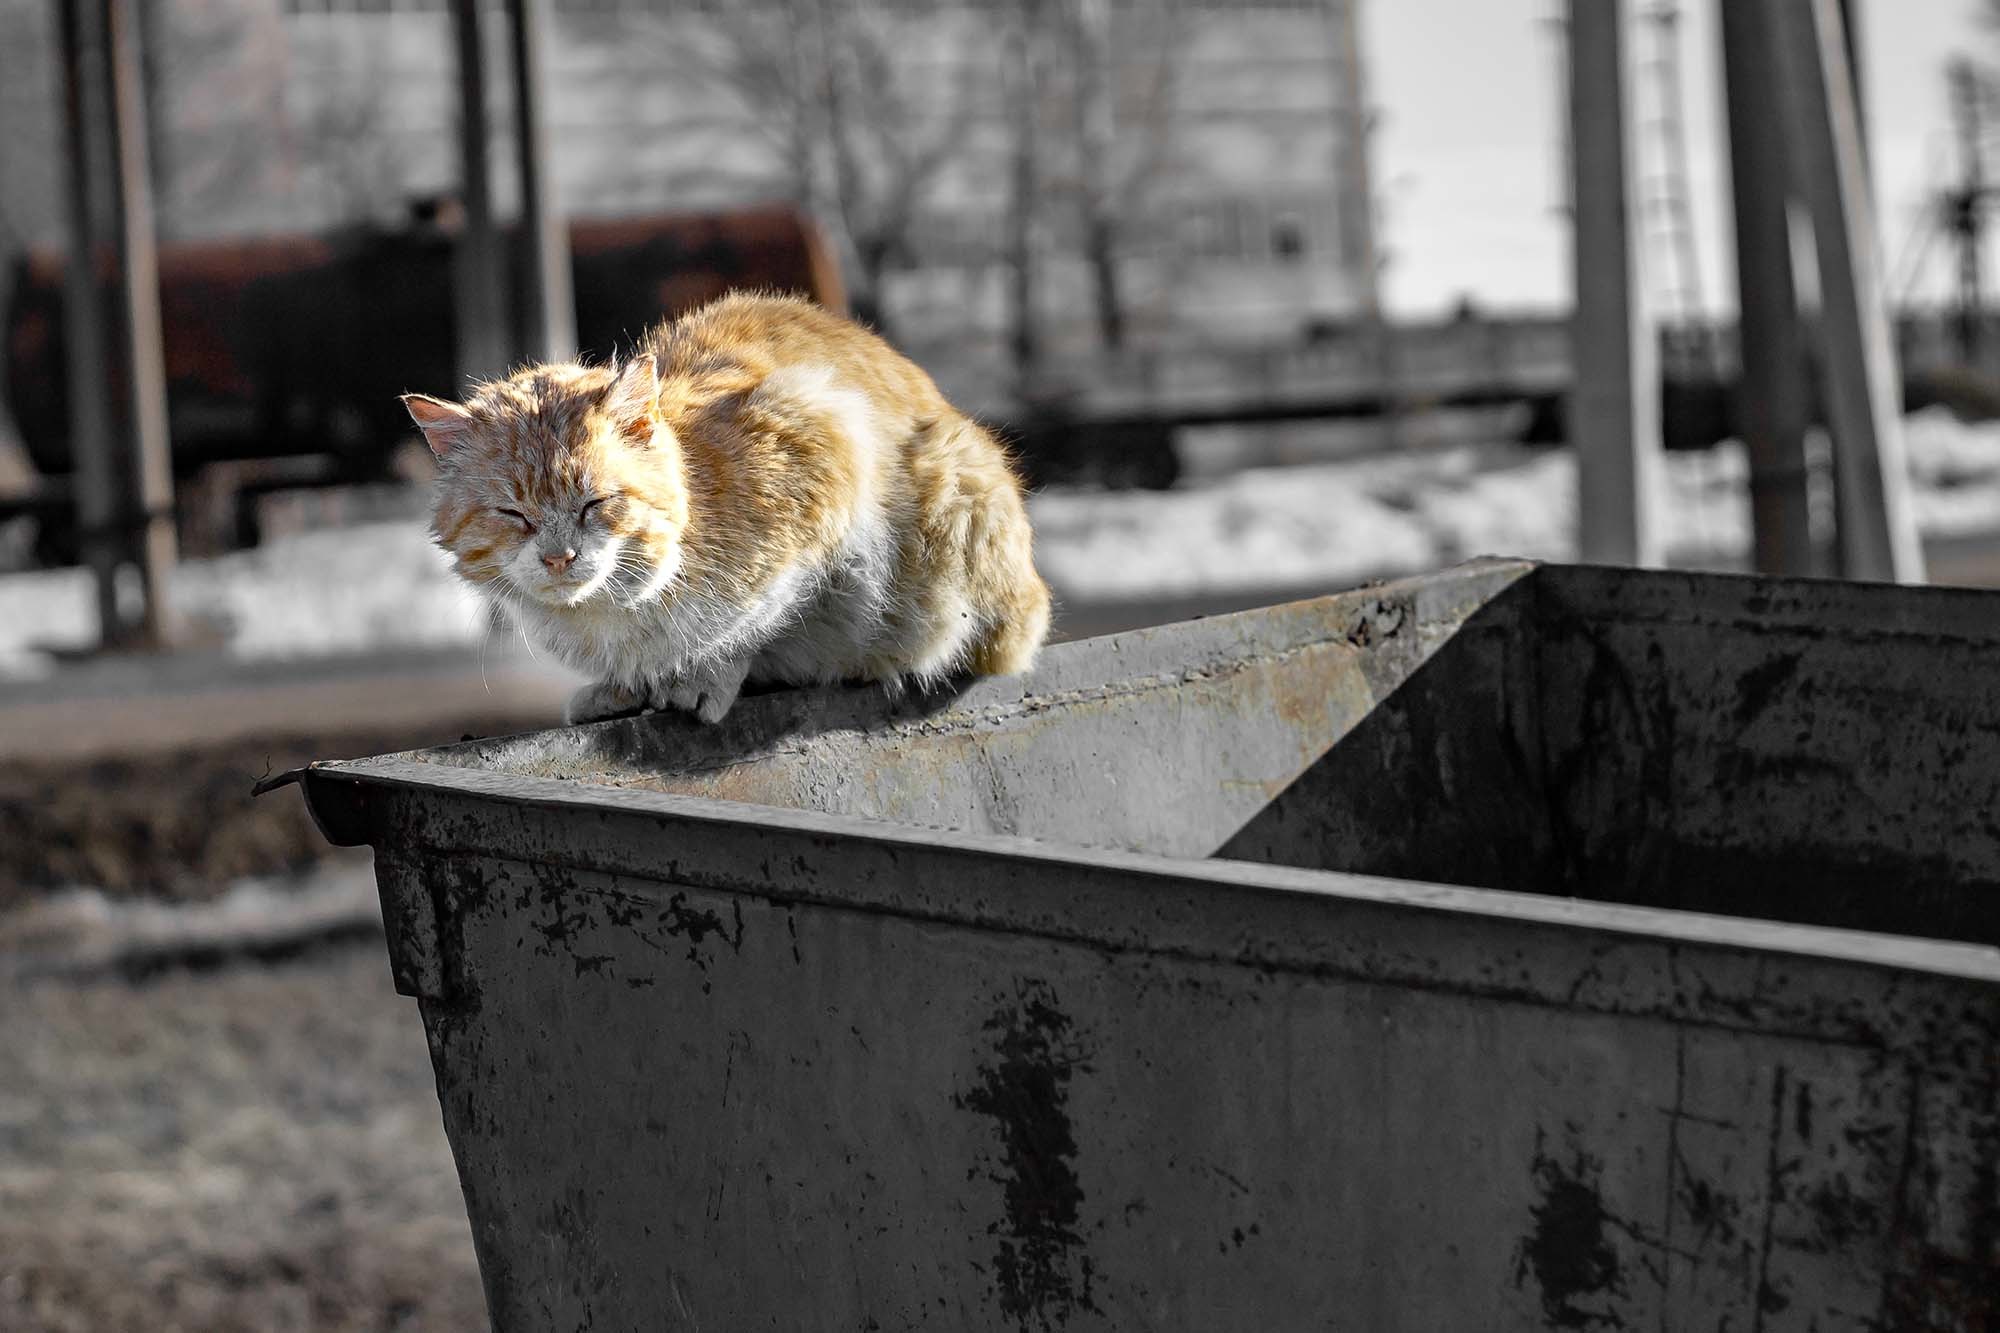 The strange journey of the cat 'halfway around the world' from Turkey to the US